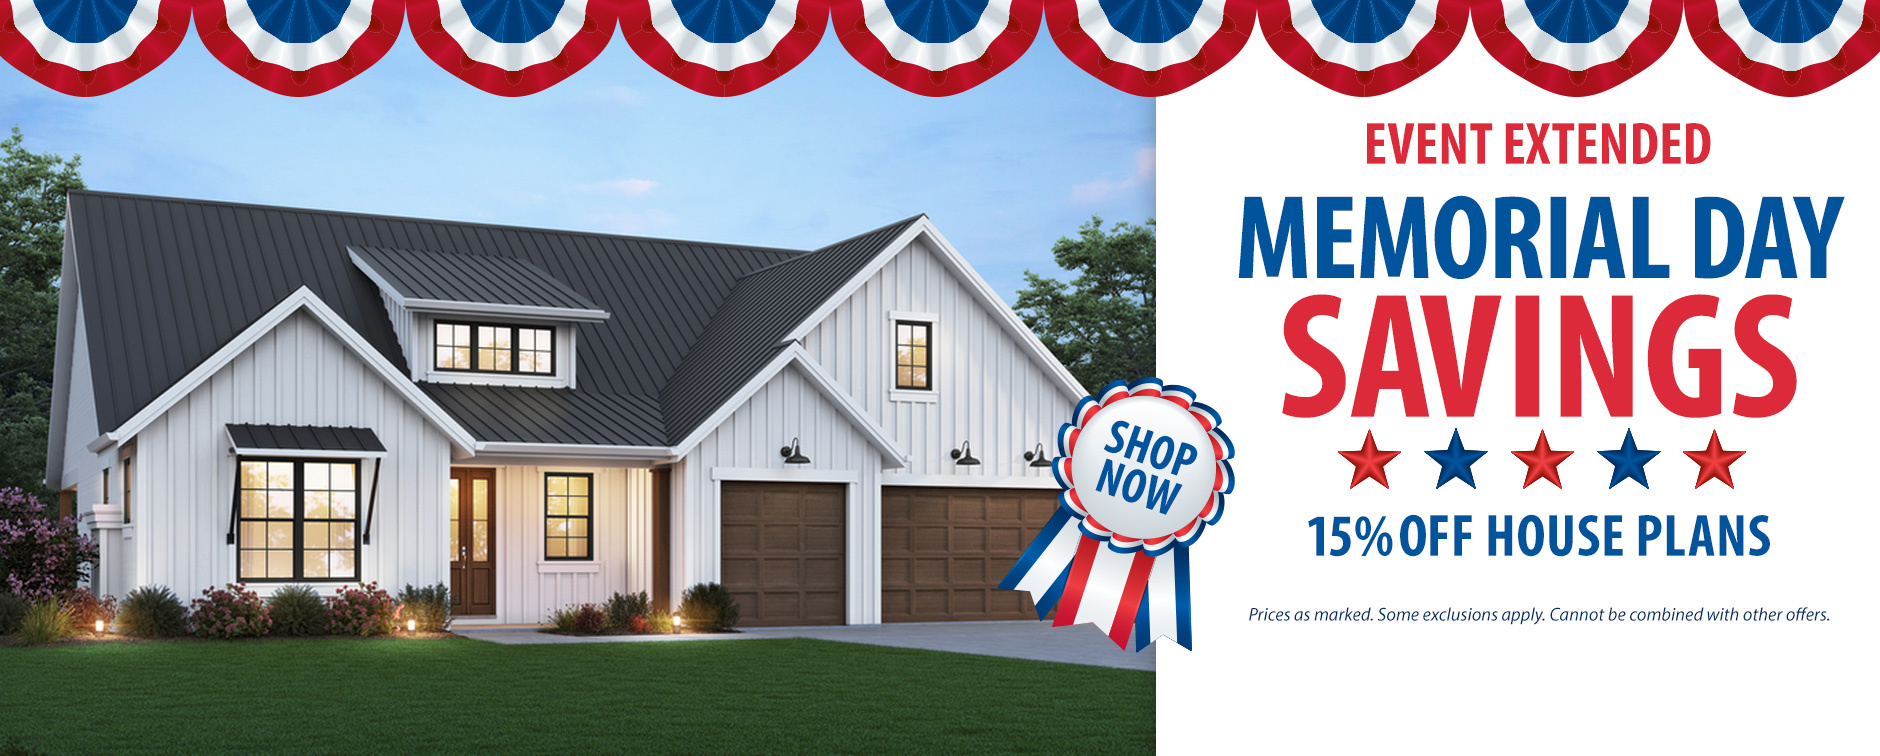 Sale Extended: Save 15% on Home Plans. No Code Needed. Exclusions Apply. Shop Now.